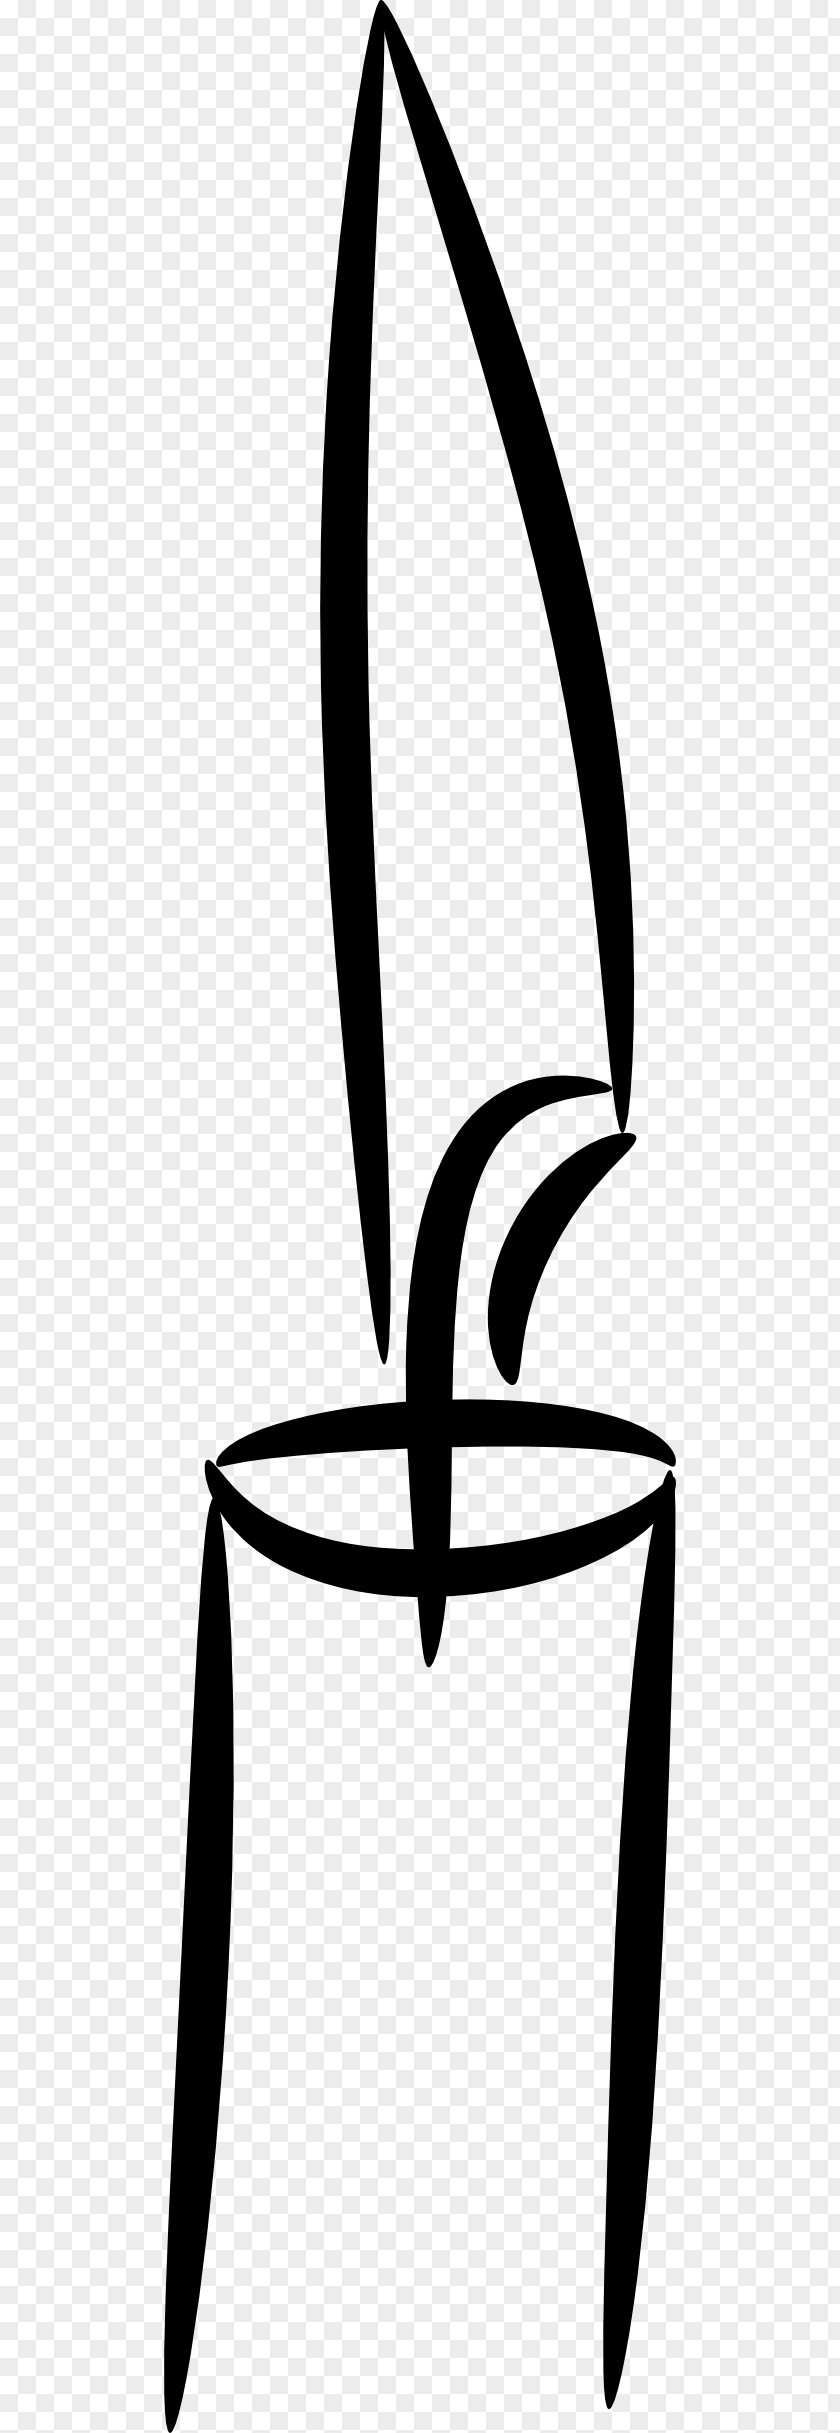 Light Black And White Candle Clip Art PNG